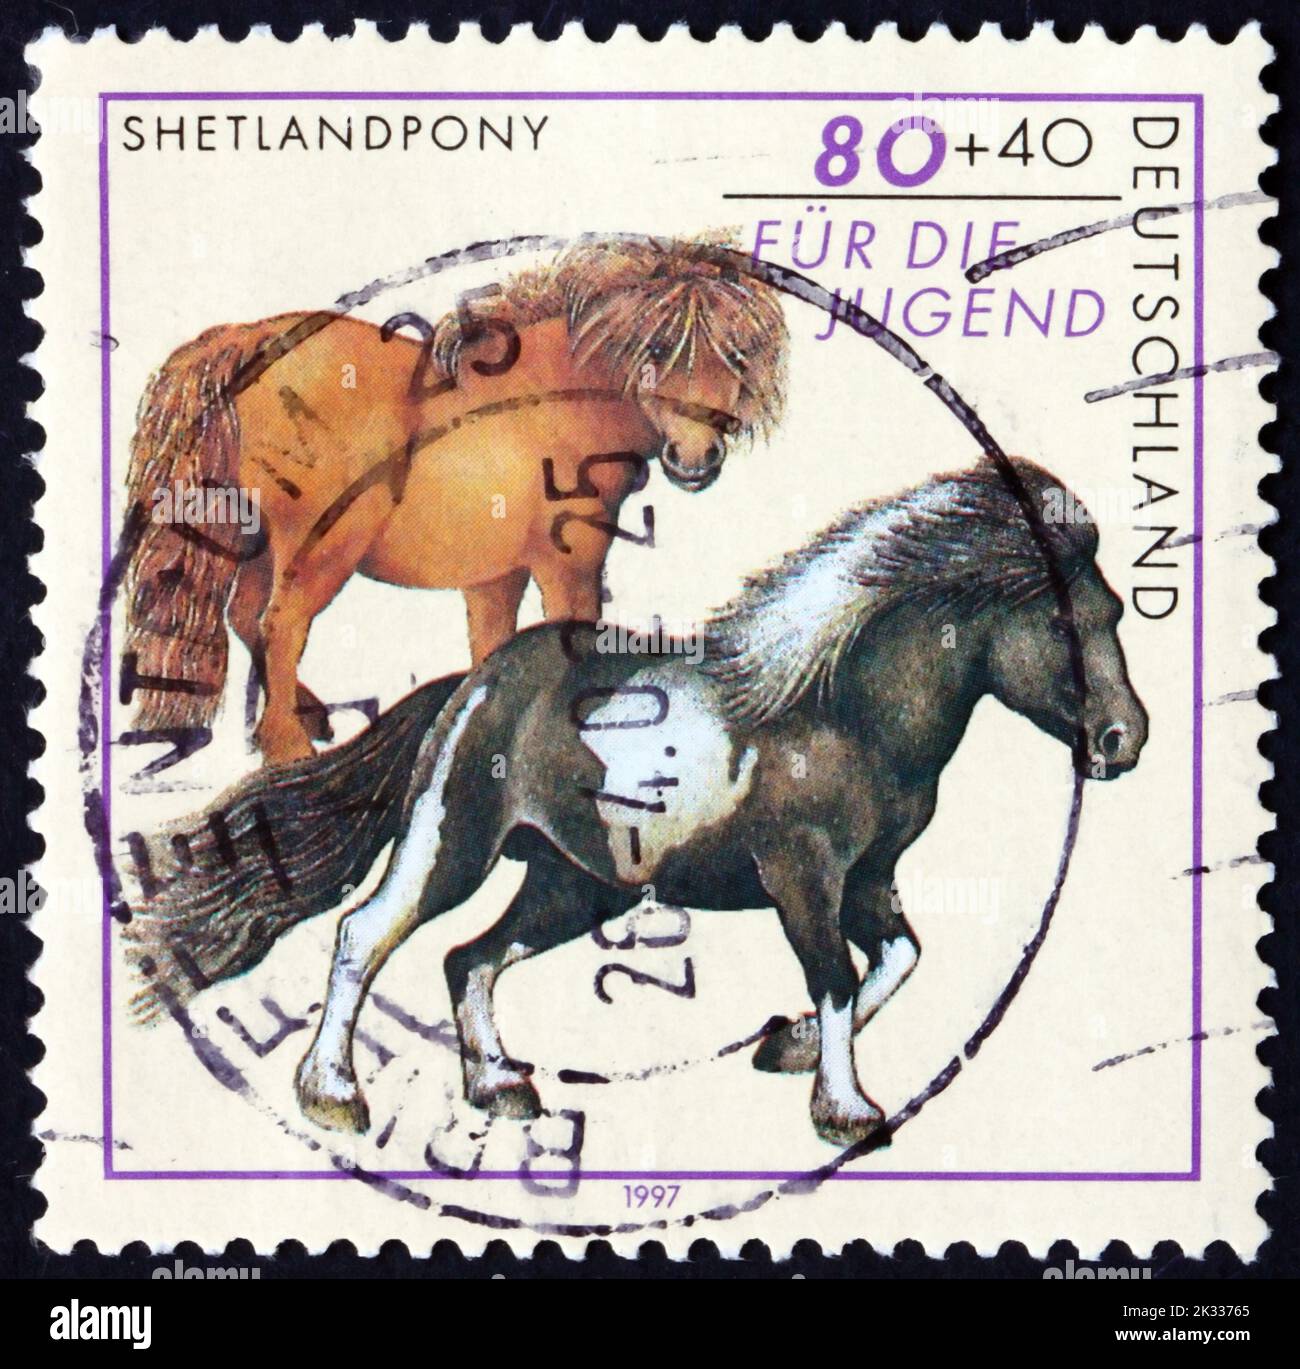 GERMANY - CIRCA 1997: a stamp printed in Germany shows Shetland pony, horse, circa 1997 Stock Photo